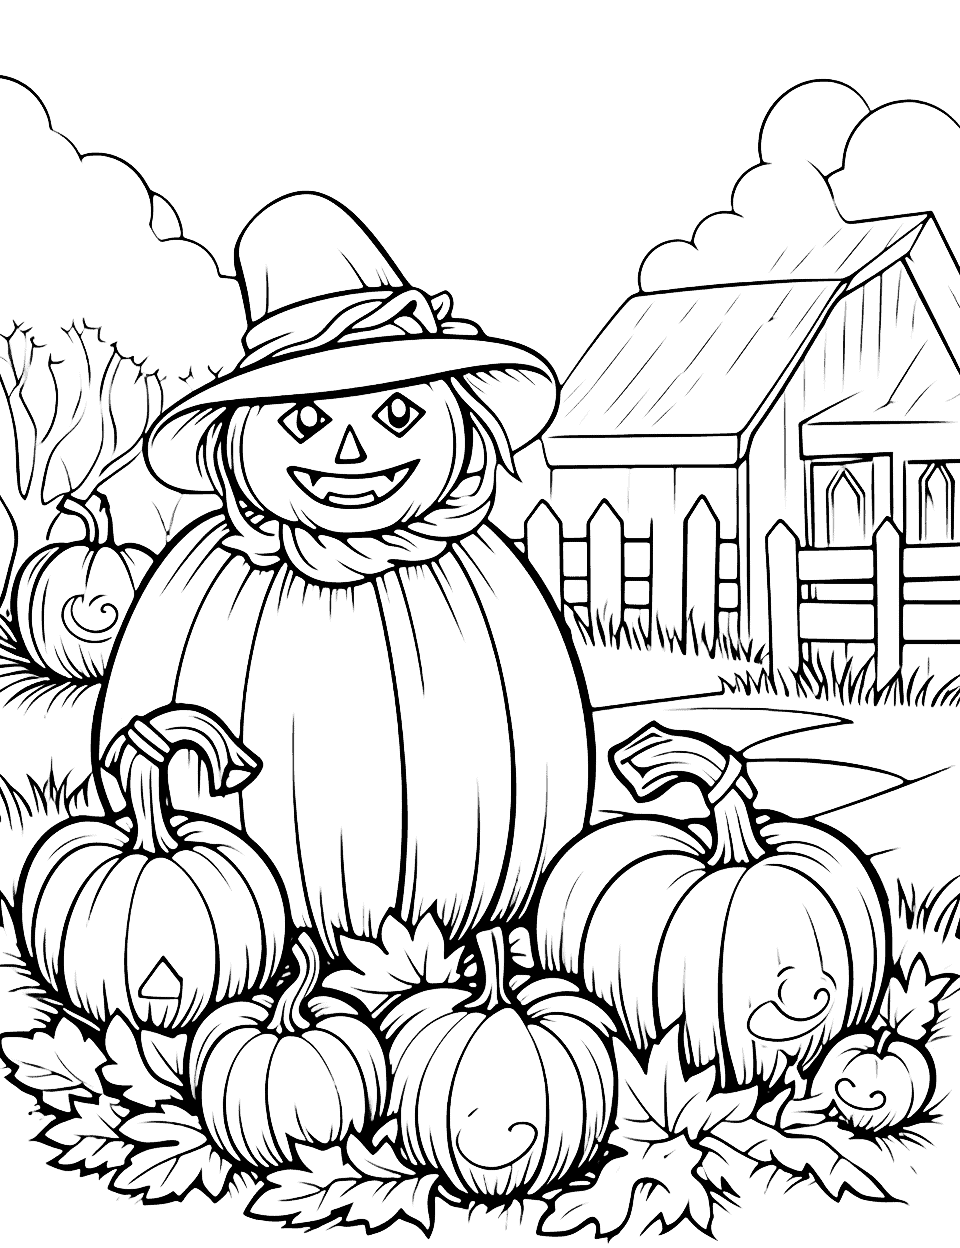 Pumpkin Farm Halloween Coloring Page - A detailed pumpkin farm with scarecrow and lots of pumpkins ready for harvest.